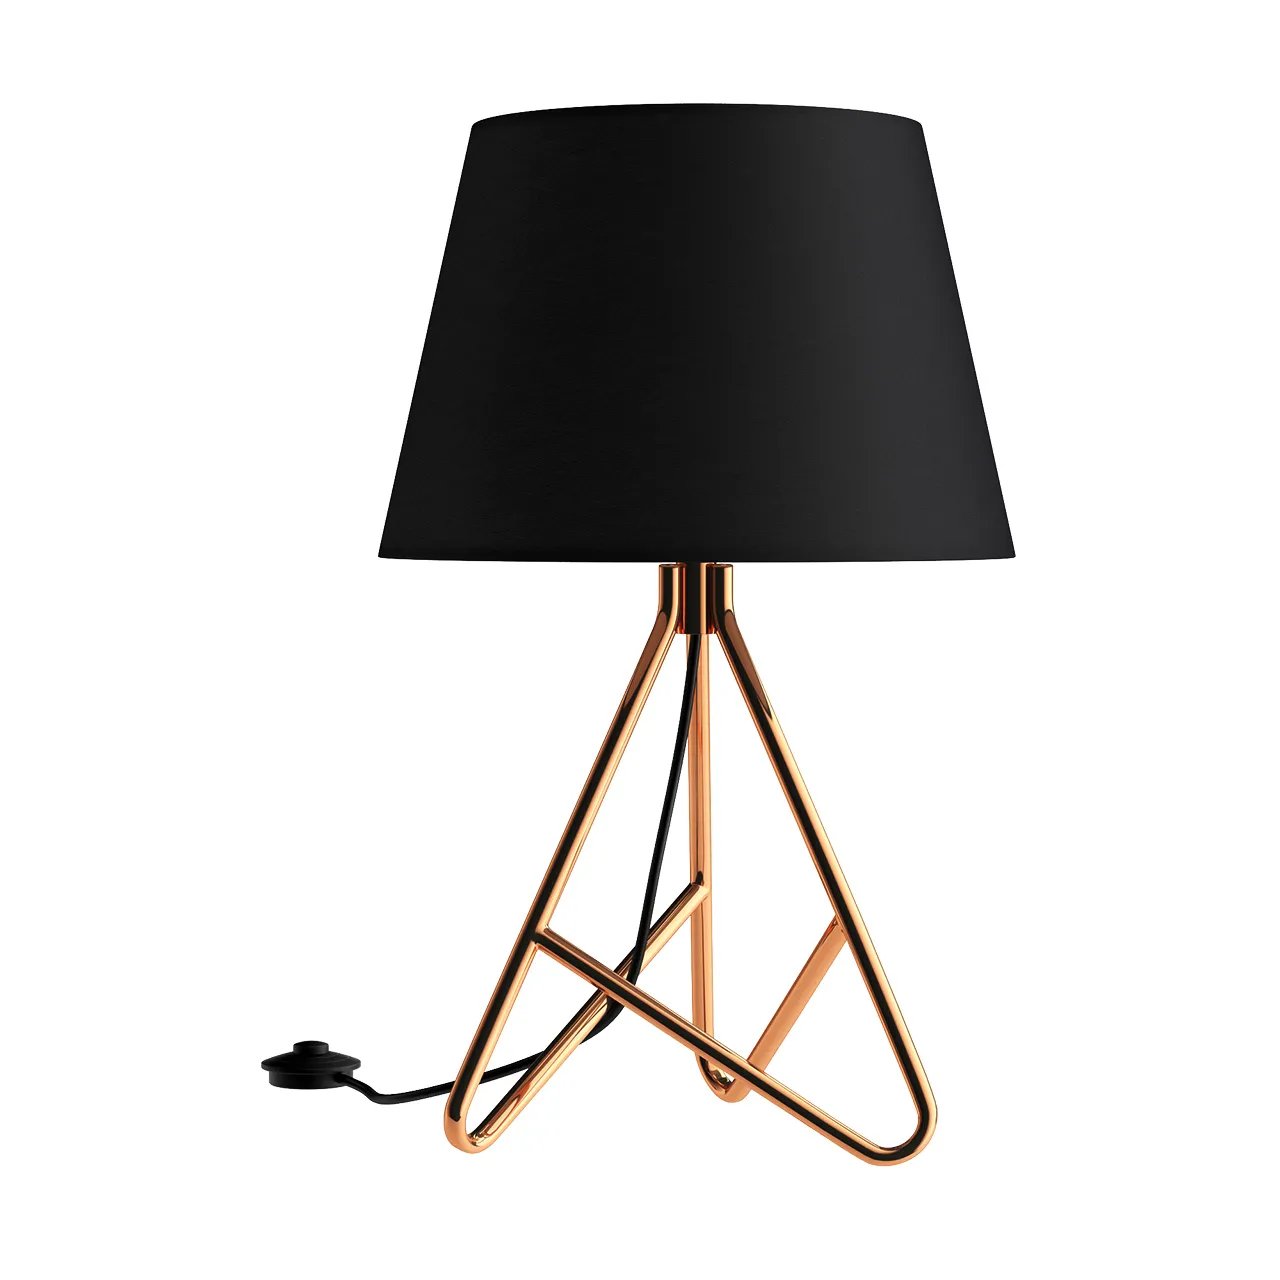 Lighting – albus-twisted-table-lamp-by-john-lewis-Partners